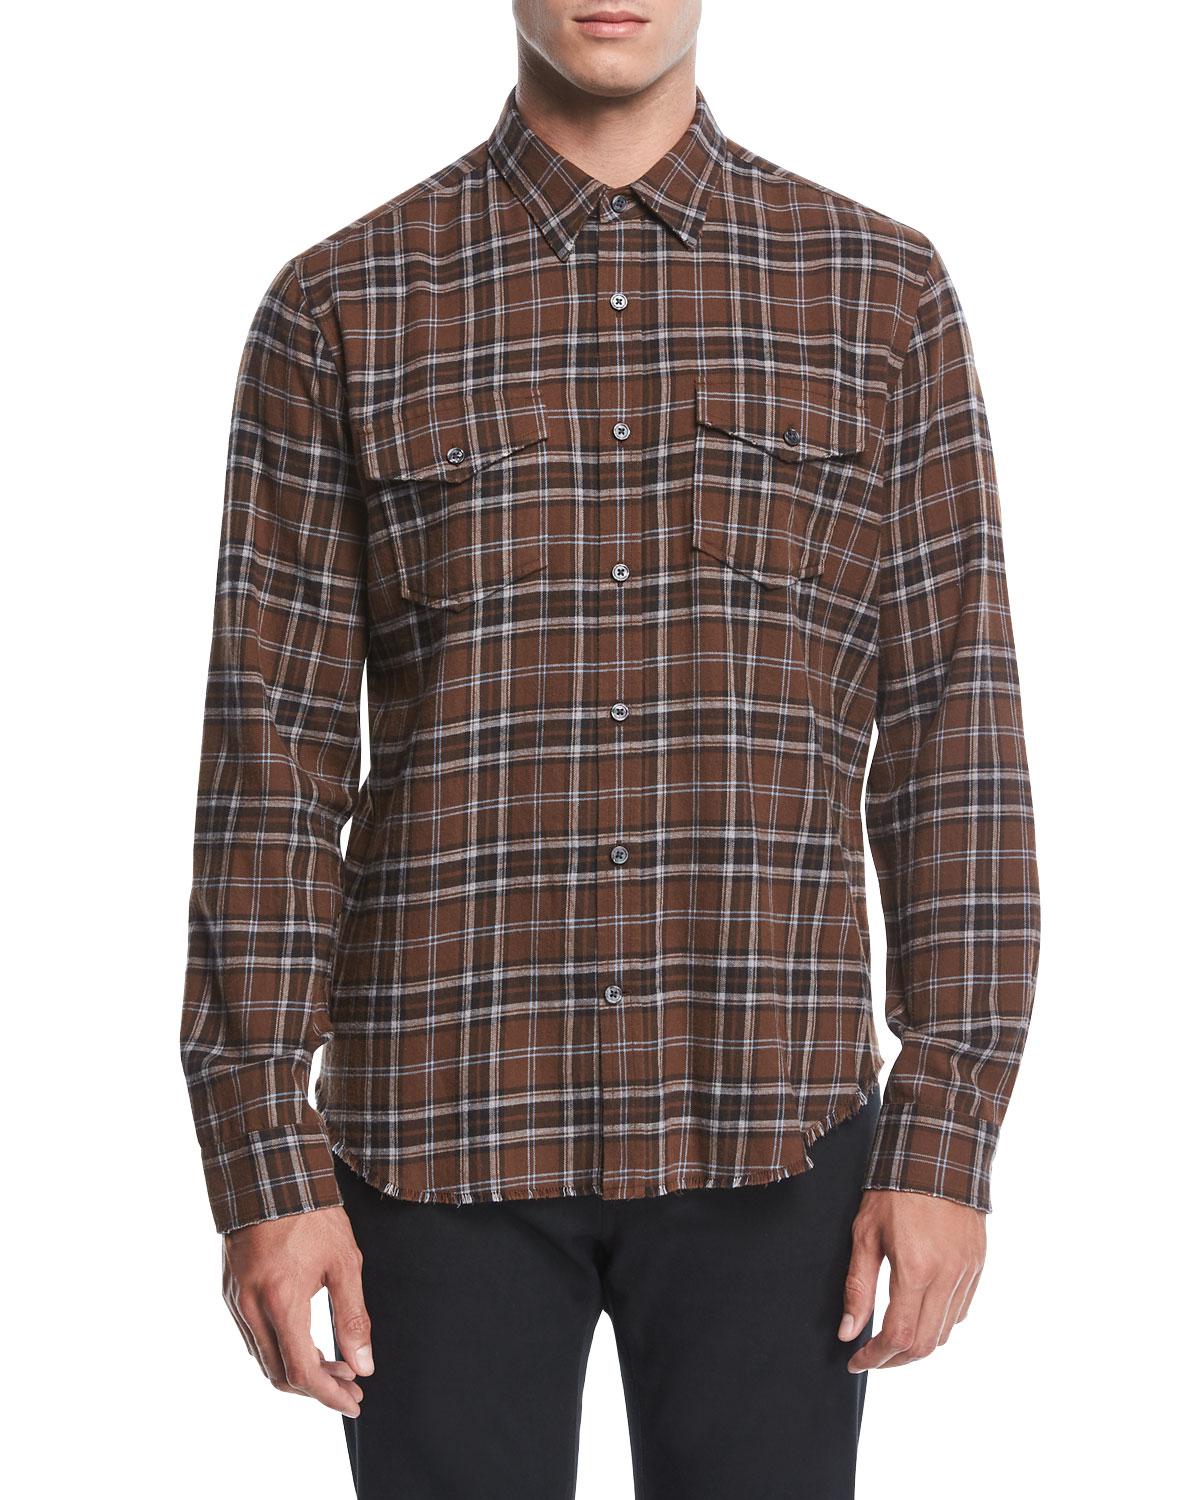 Lyst - Vince Plaid Flannel Western Shirt in Brown for Men